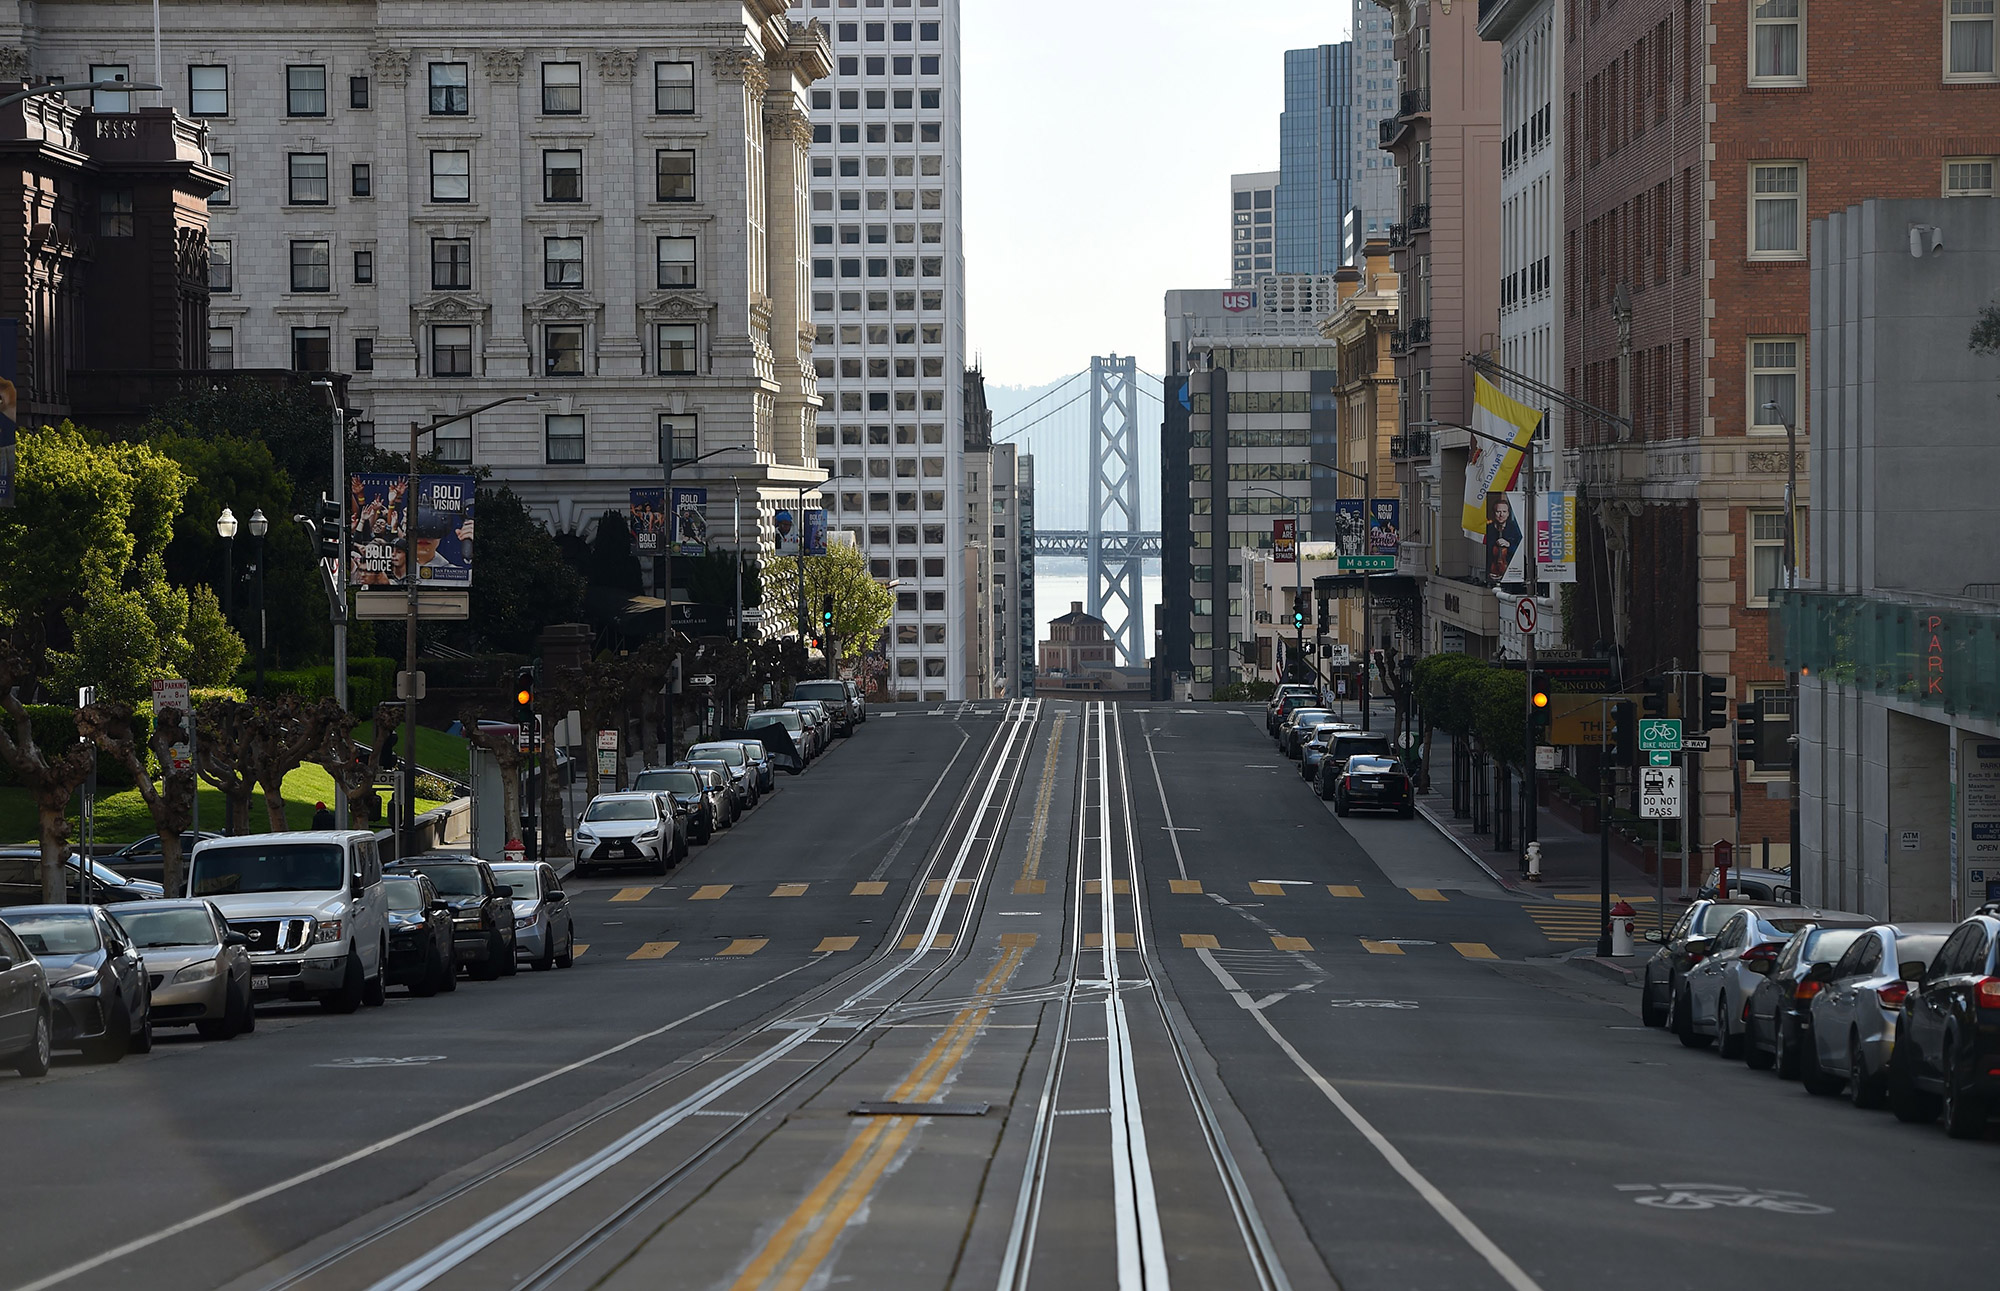 California Street, usually filled with San Francisco's iconic cable cars, is seen mostly empty on Tuesday.